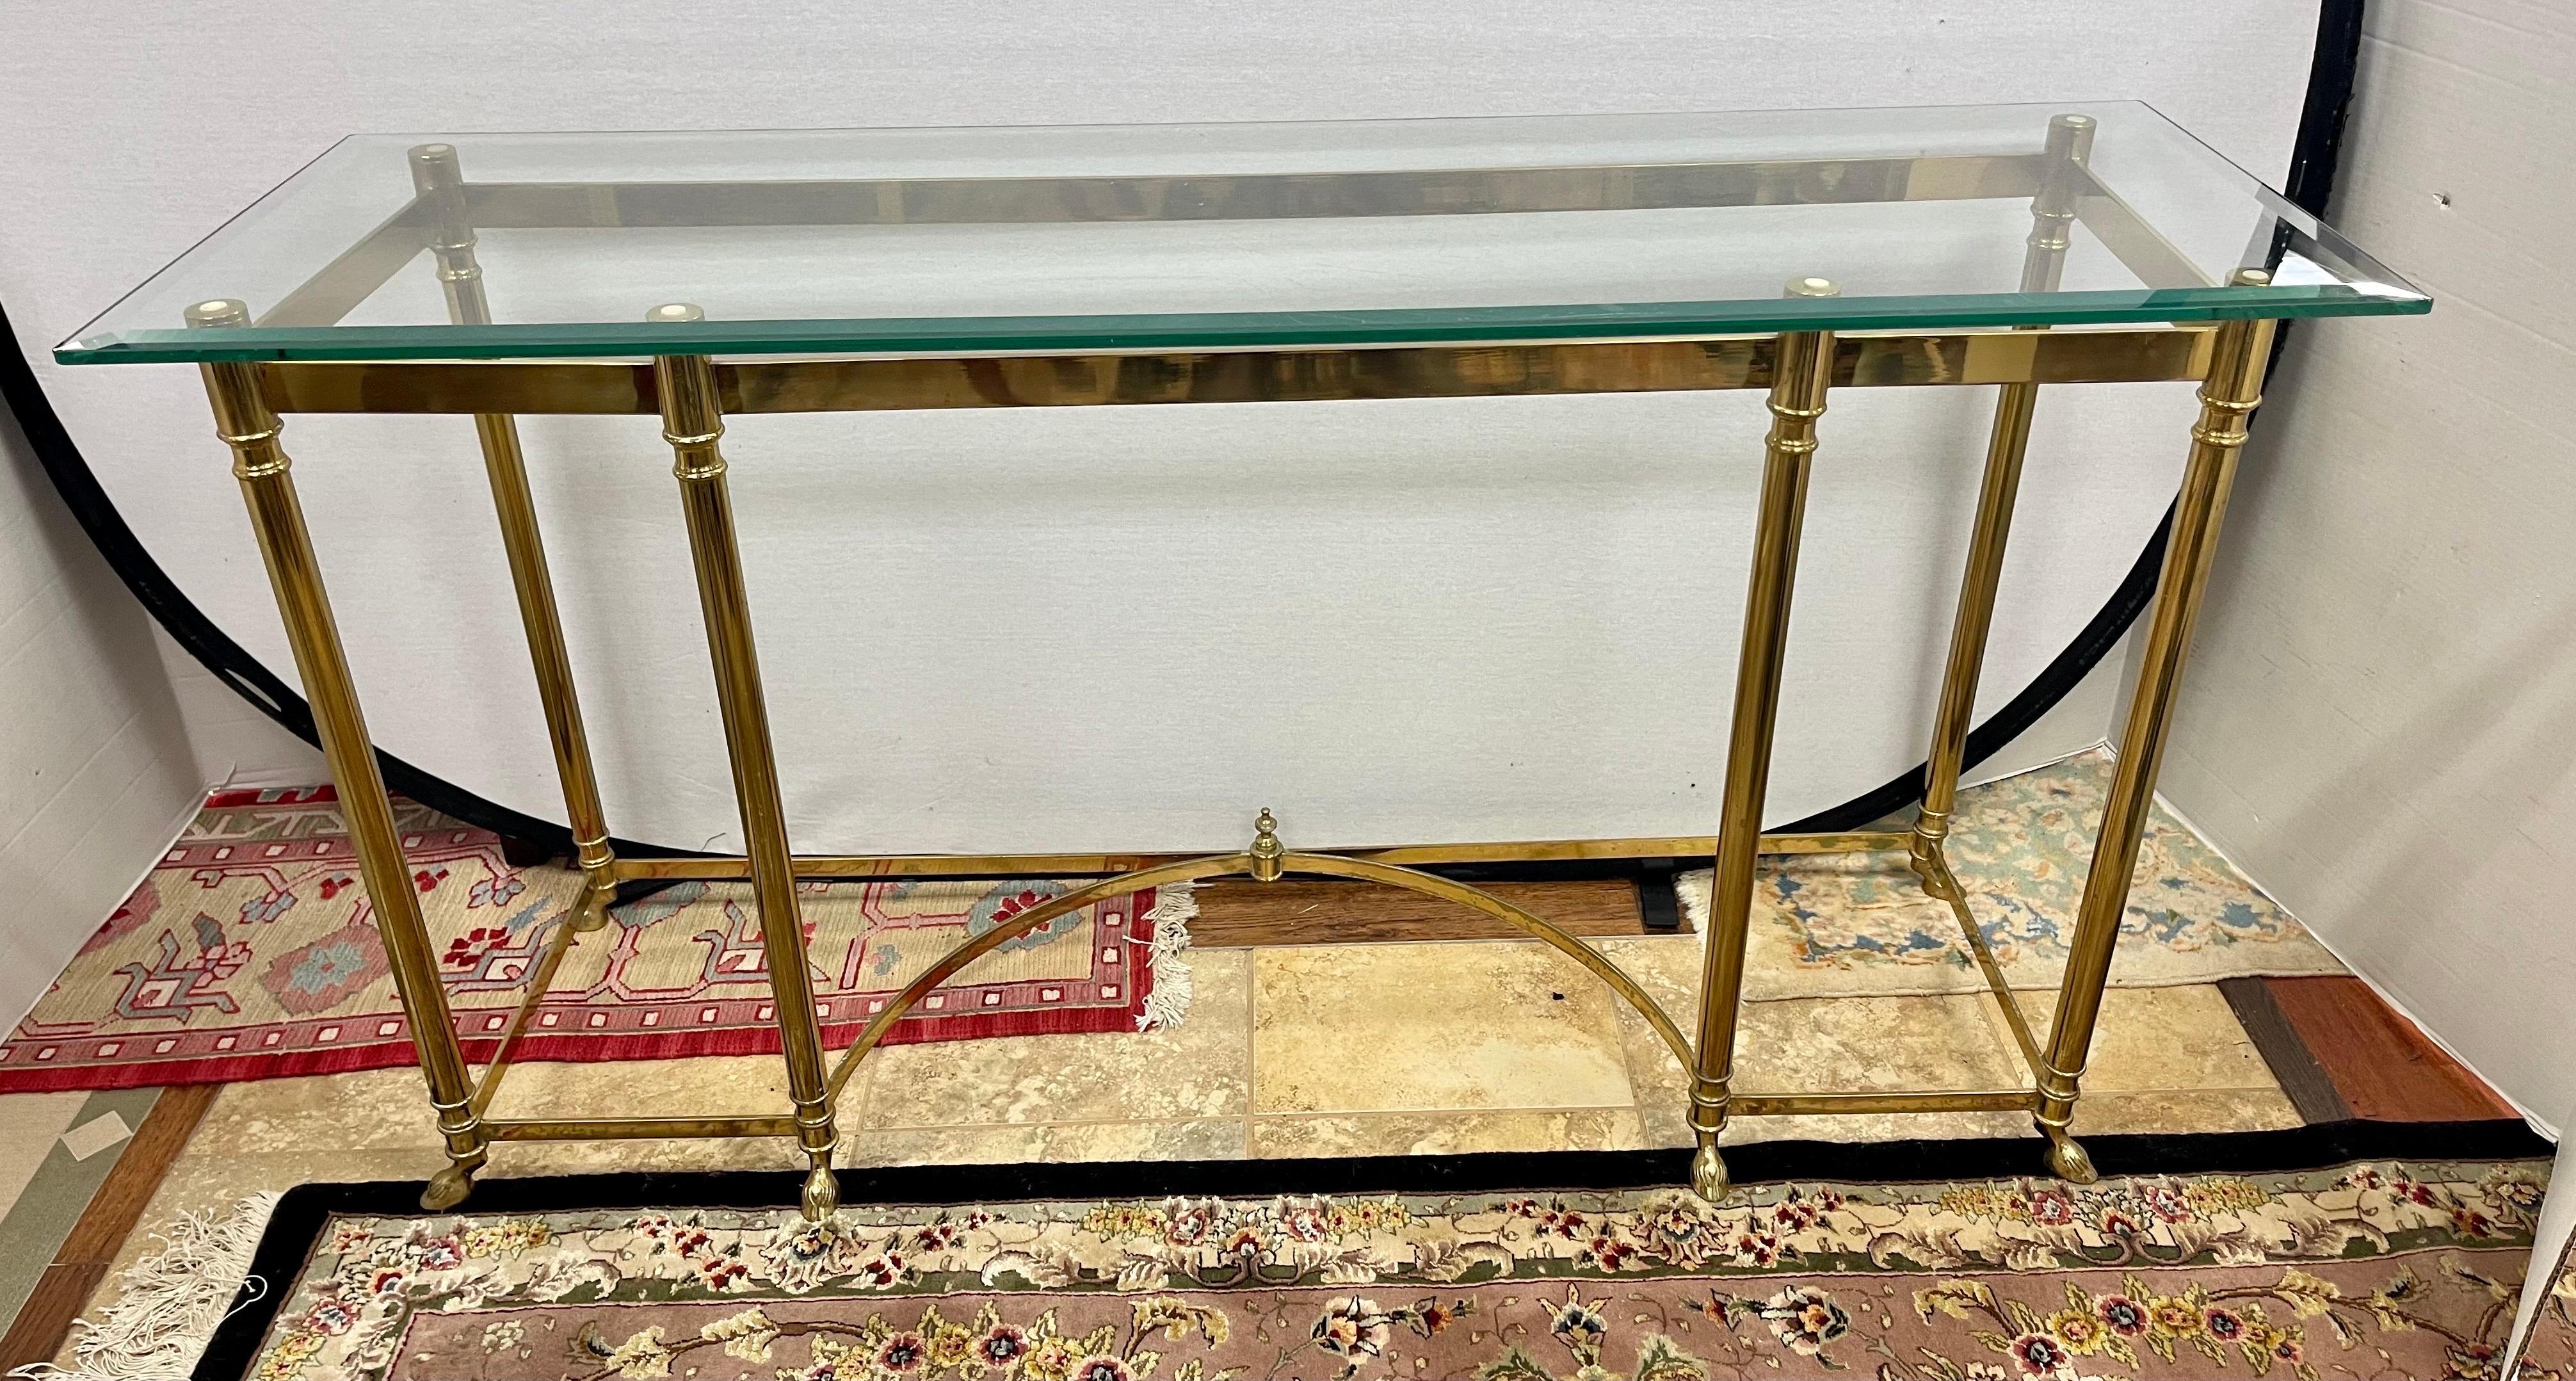 Italian Maison Jansen Mid-Century Modern Brass and Glass Console Table Made in Italy